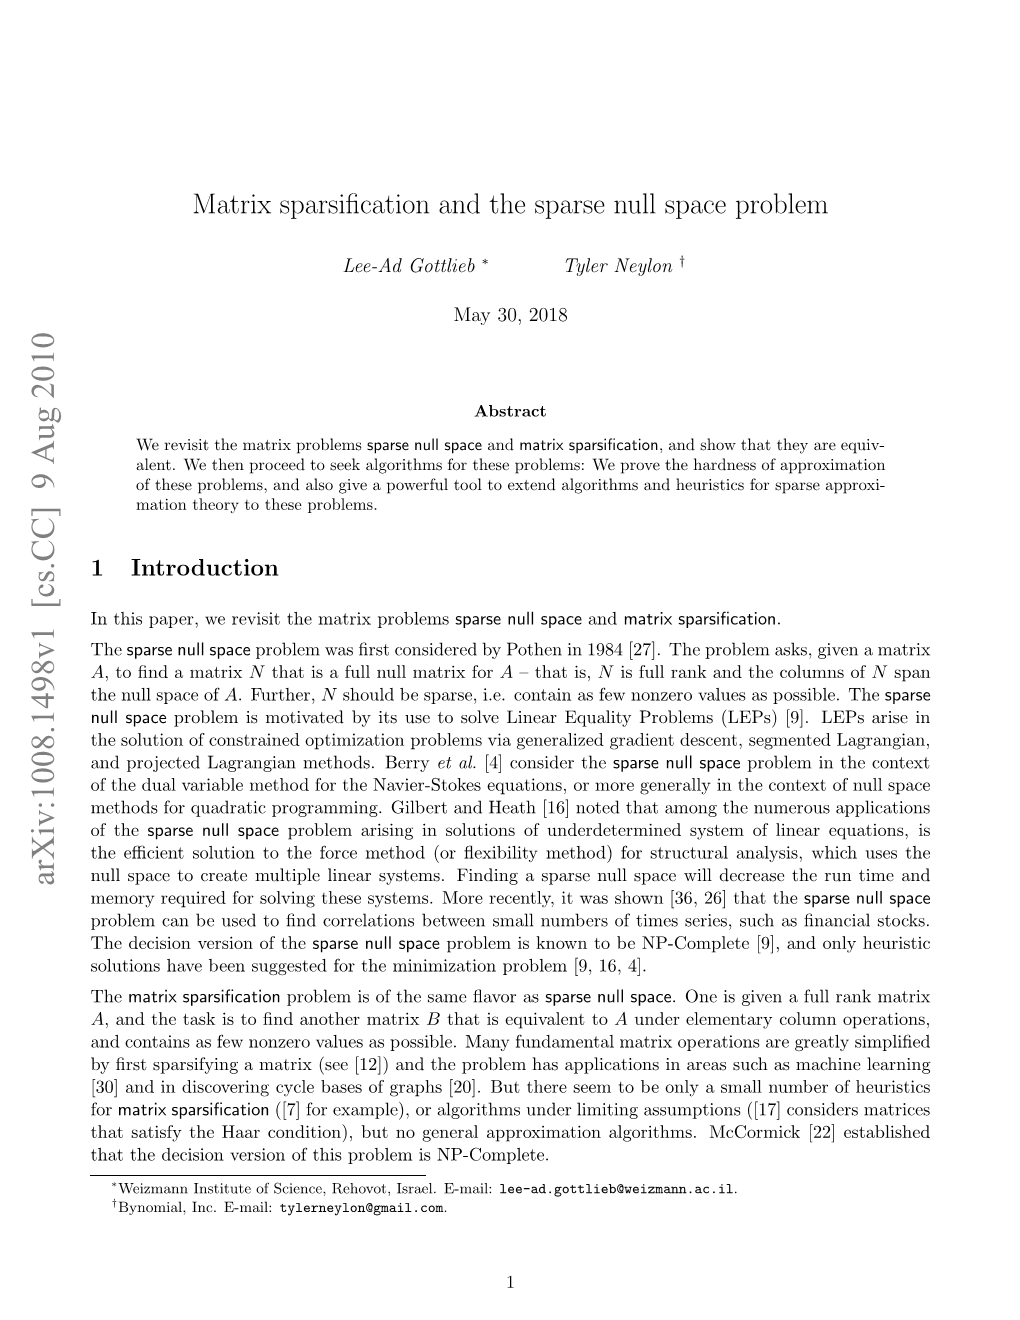 Matrix Sparsification and the Sparse Null Space Problem